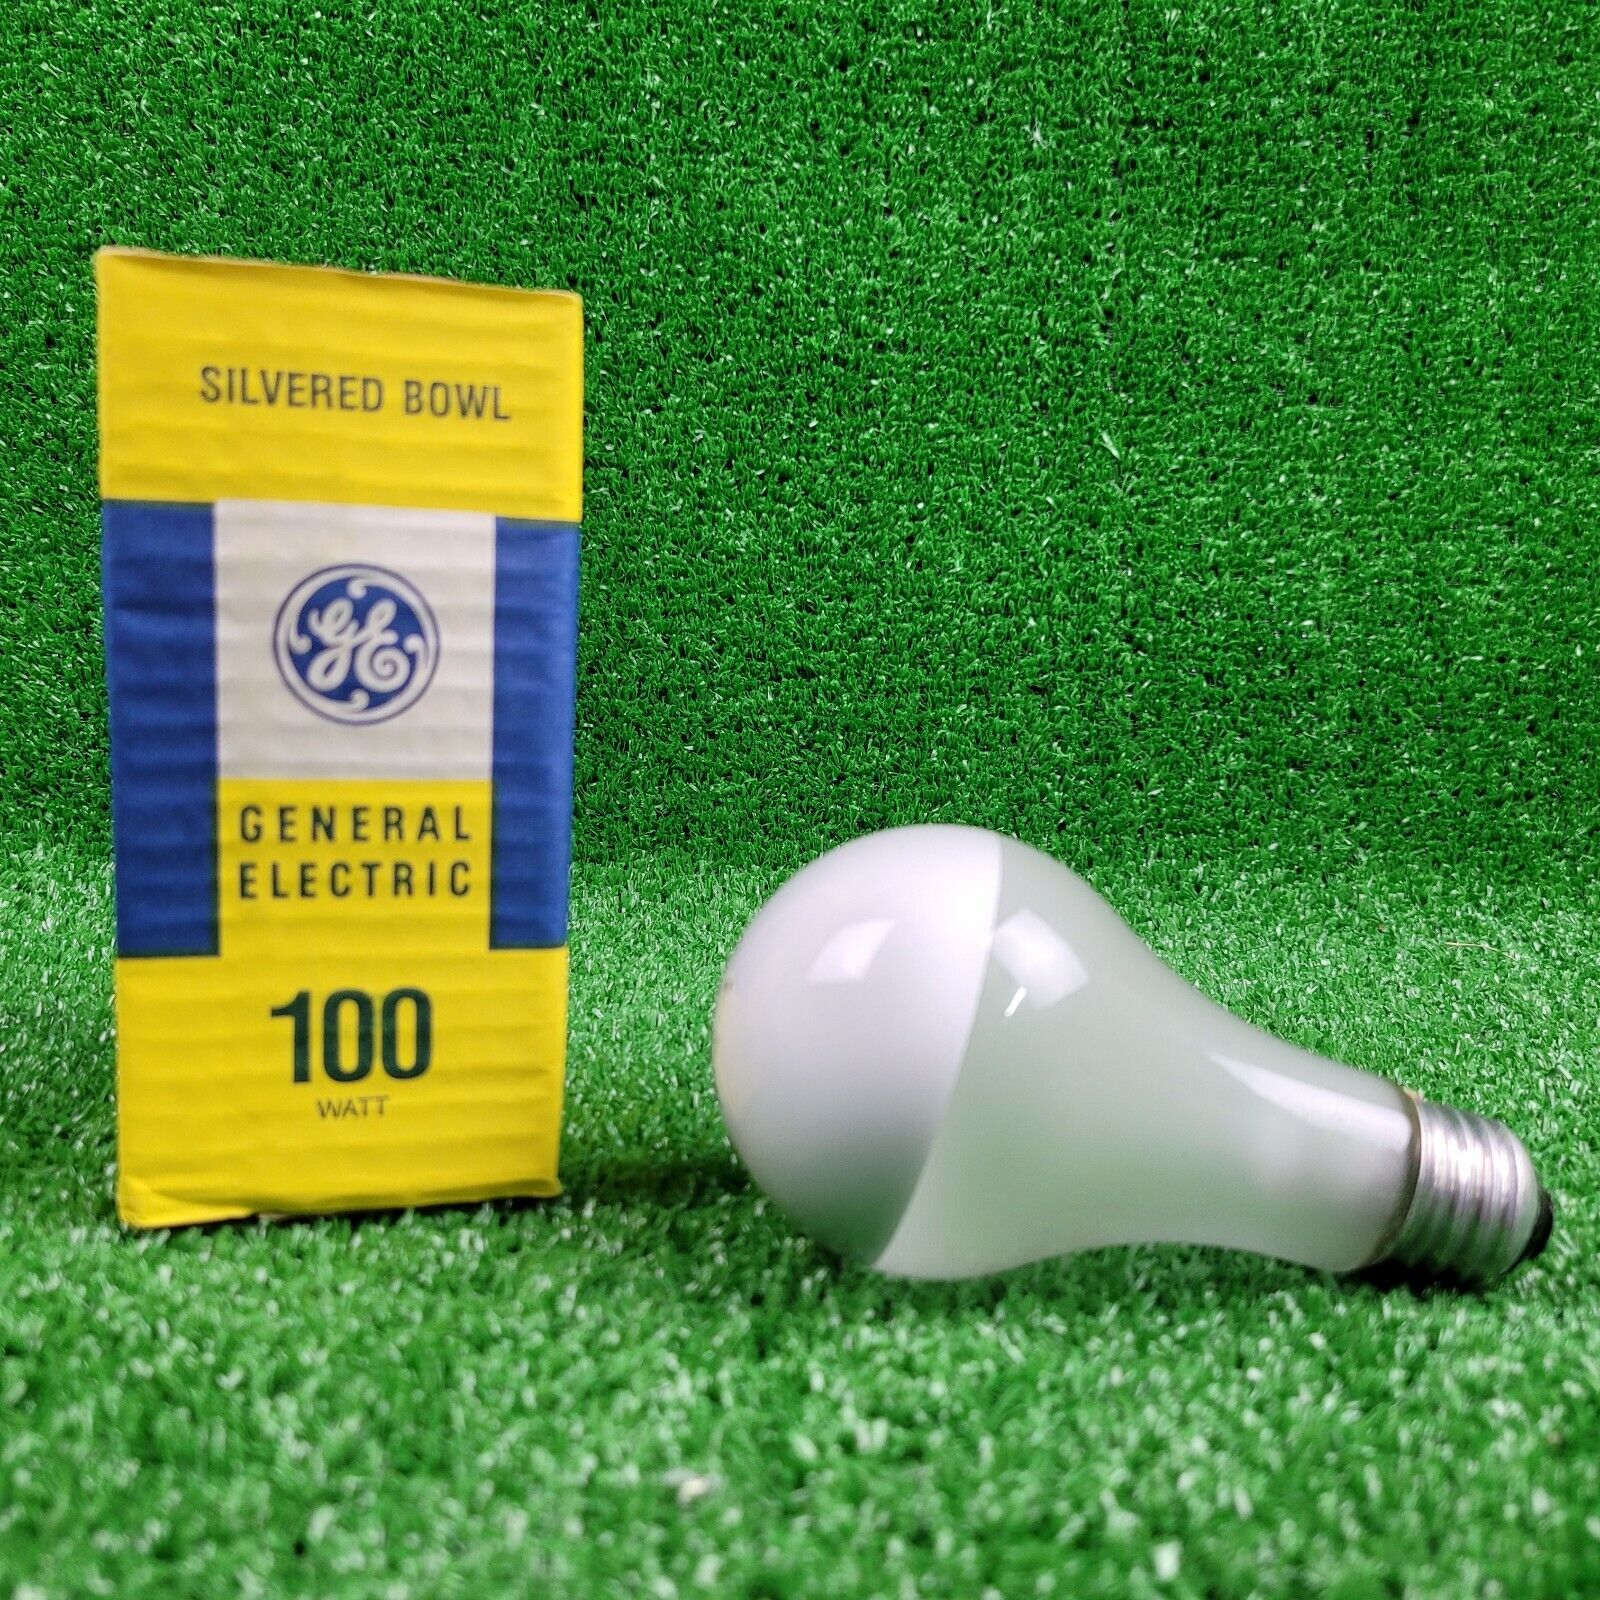 Vintage New General Electric GE100 Watt Silver Bowl Light Bulb - New Old Stock